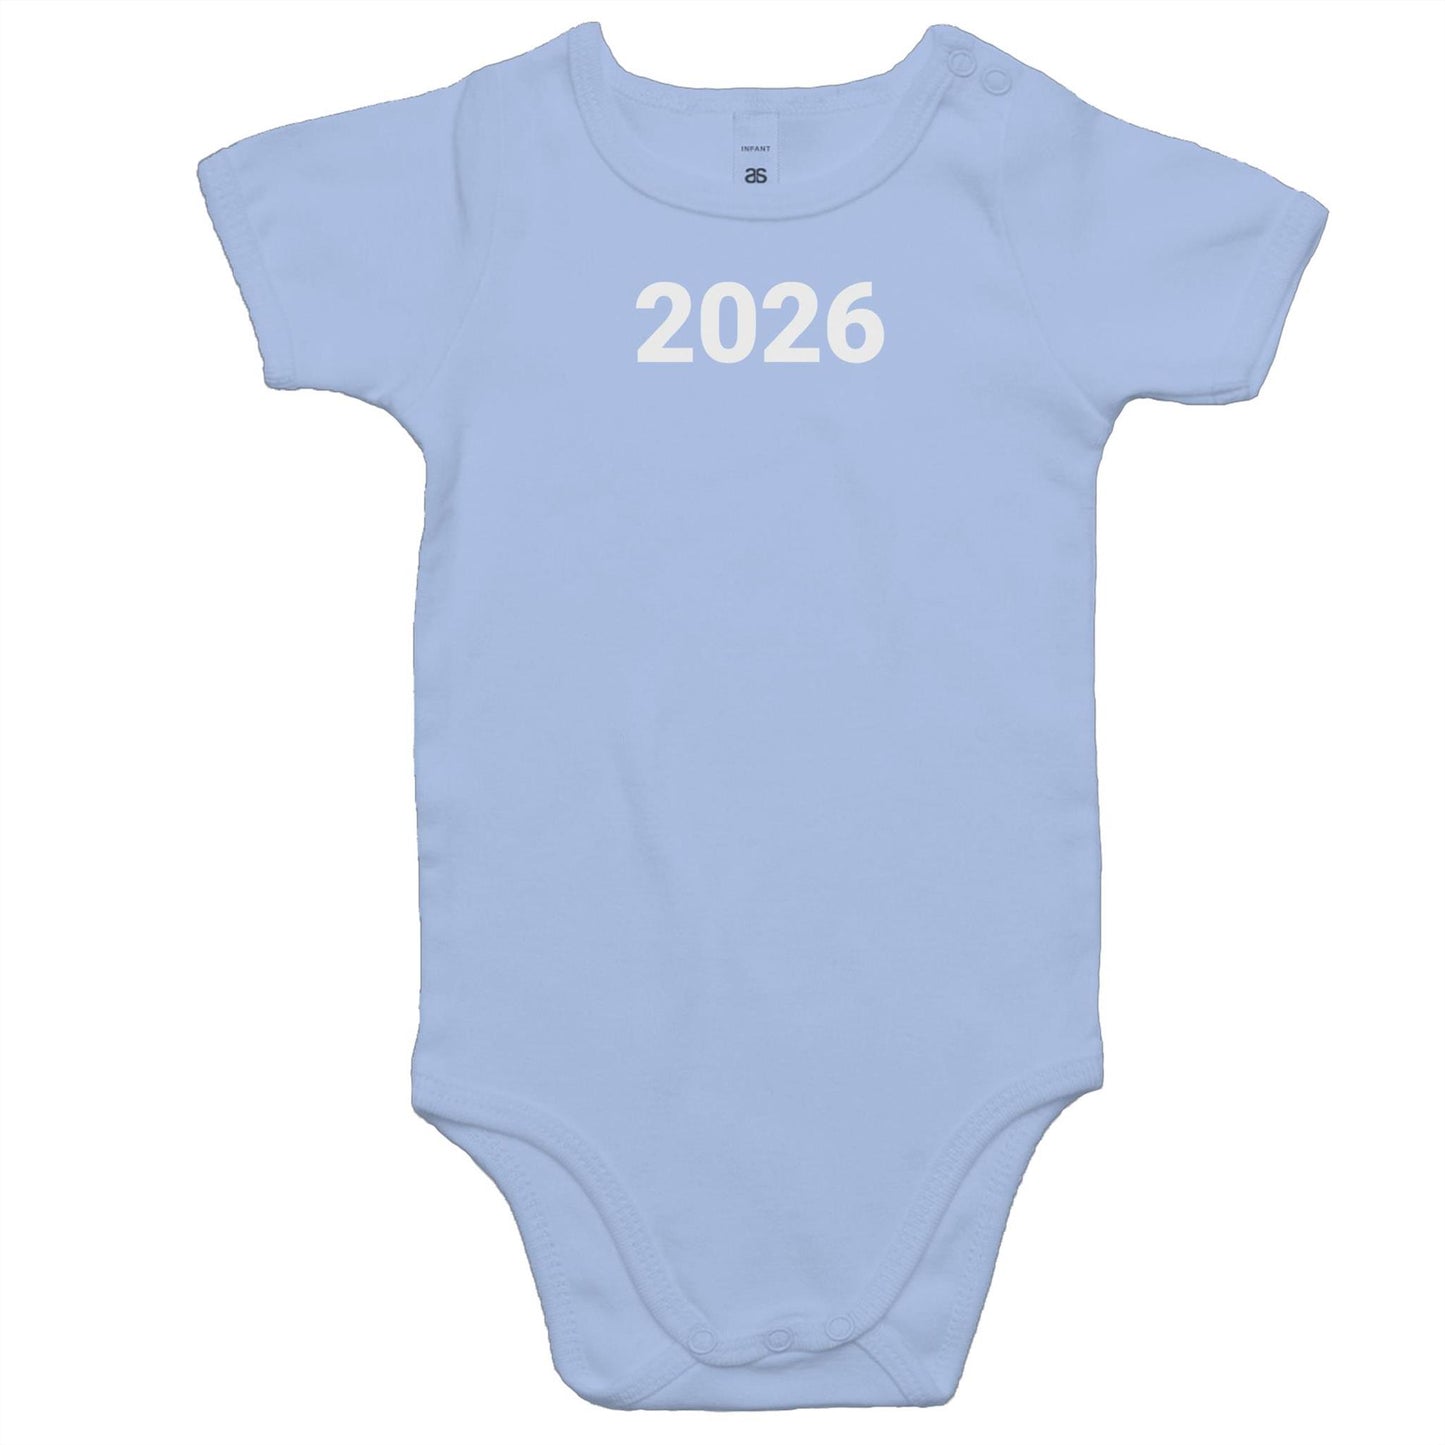 2026 Rompers for Babies